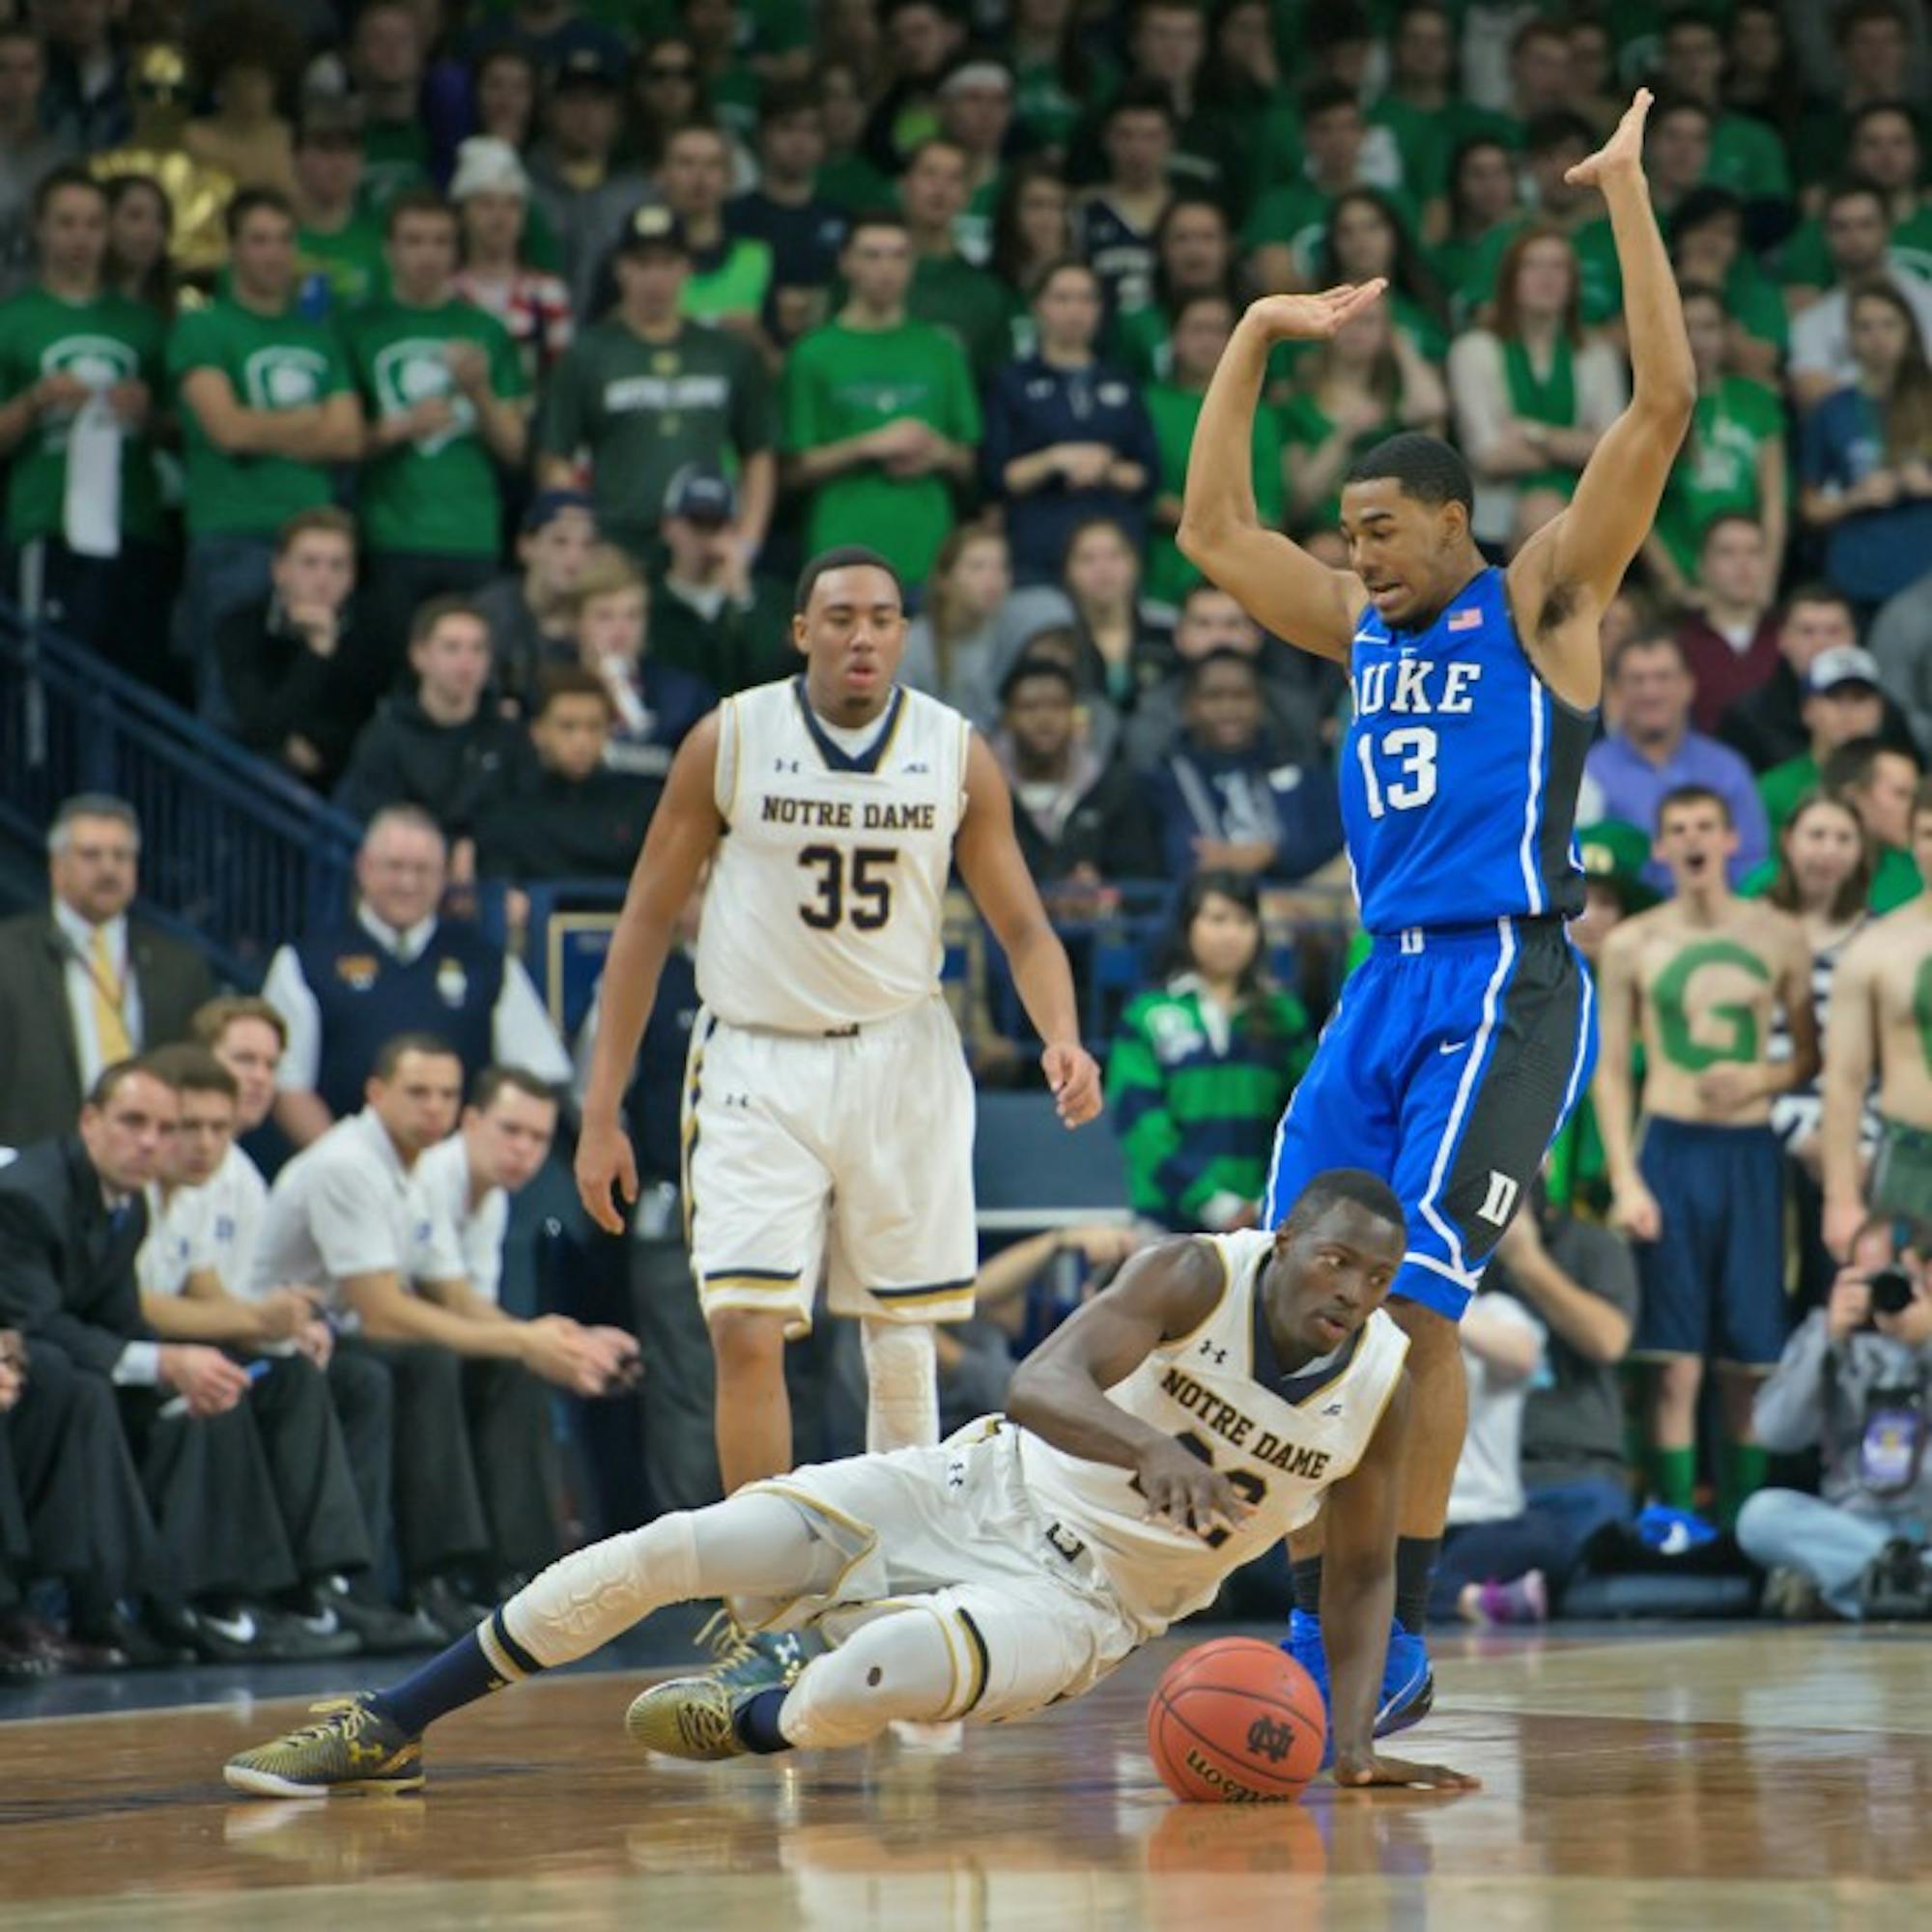 Notre Dame senior guard Jerian Grant attempts to recover from a fall during the 77-73 Irish upset of Duke on Jan. 28 at Purcell Pavilion.